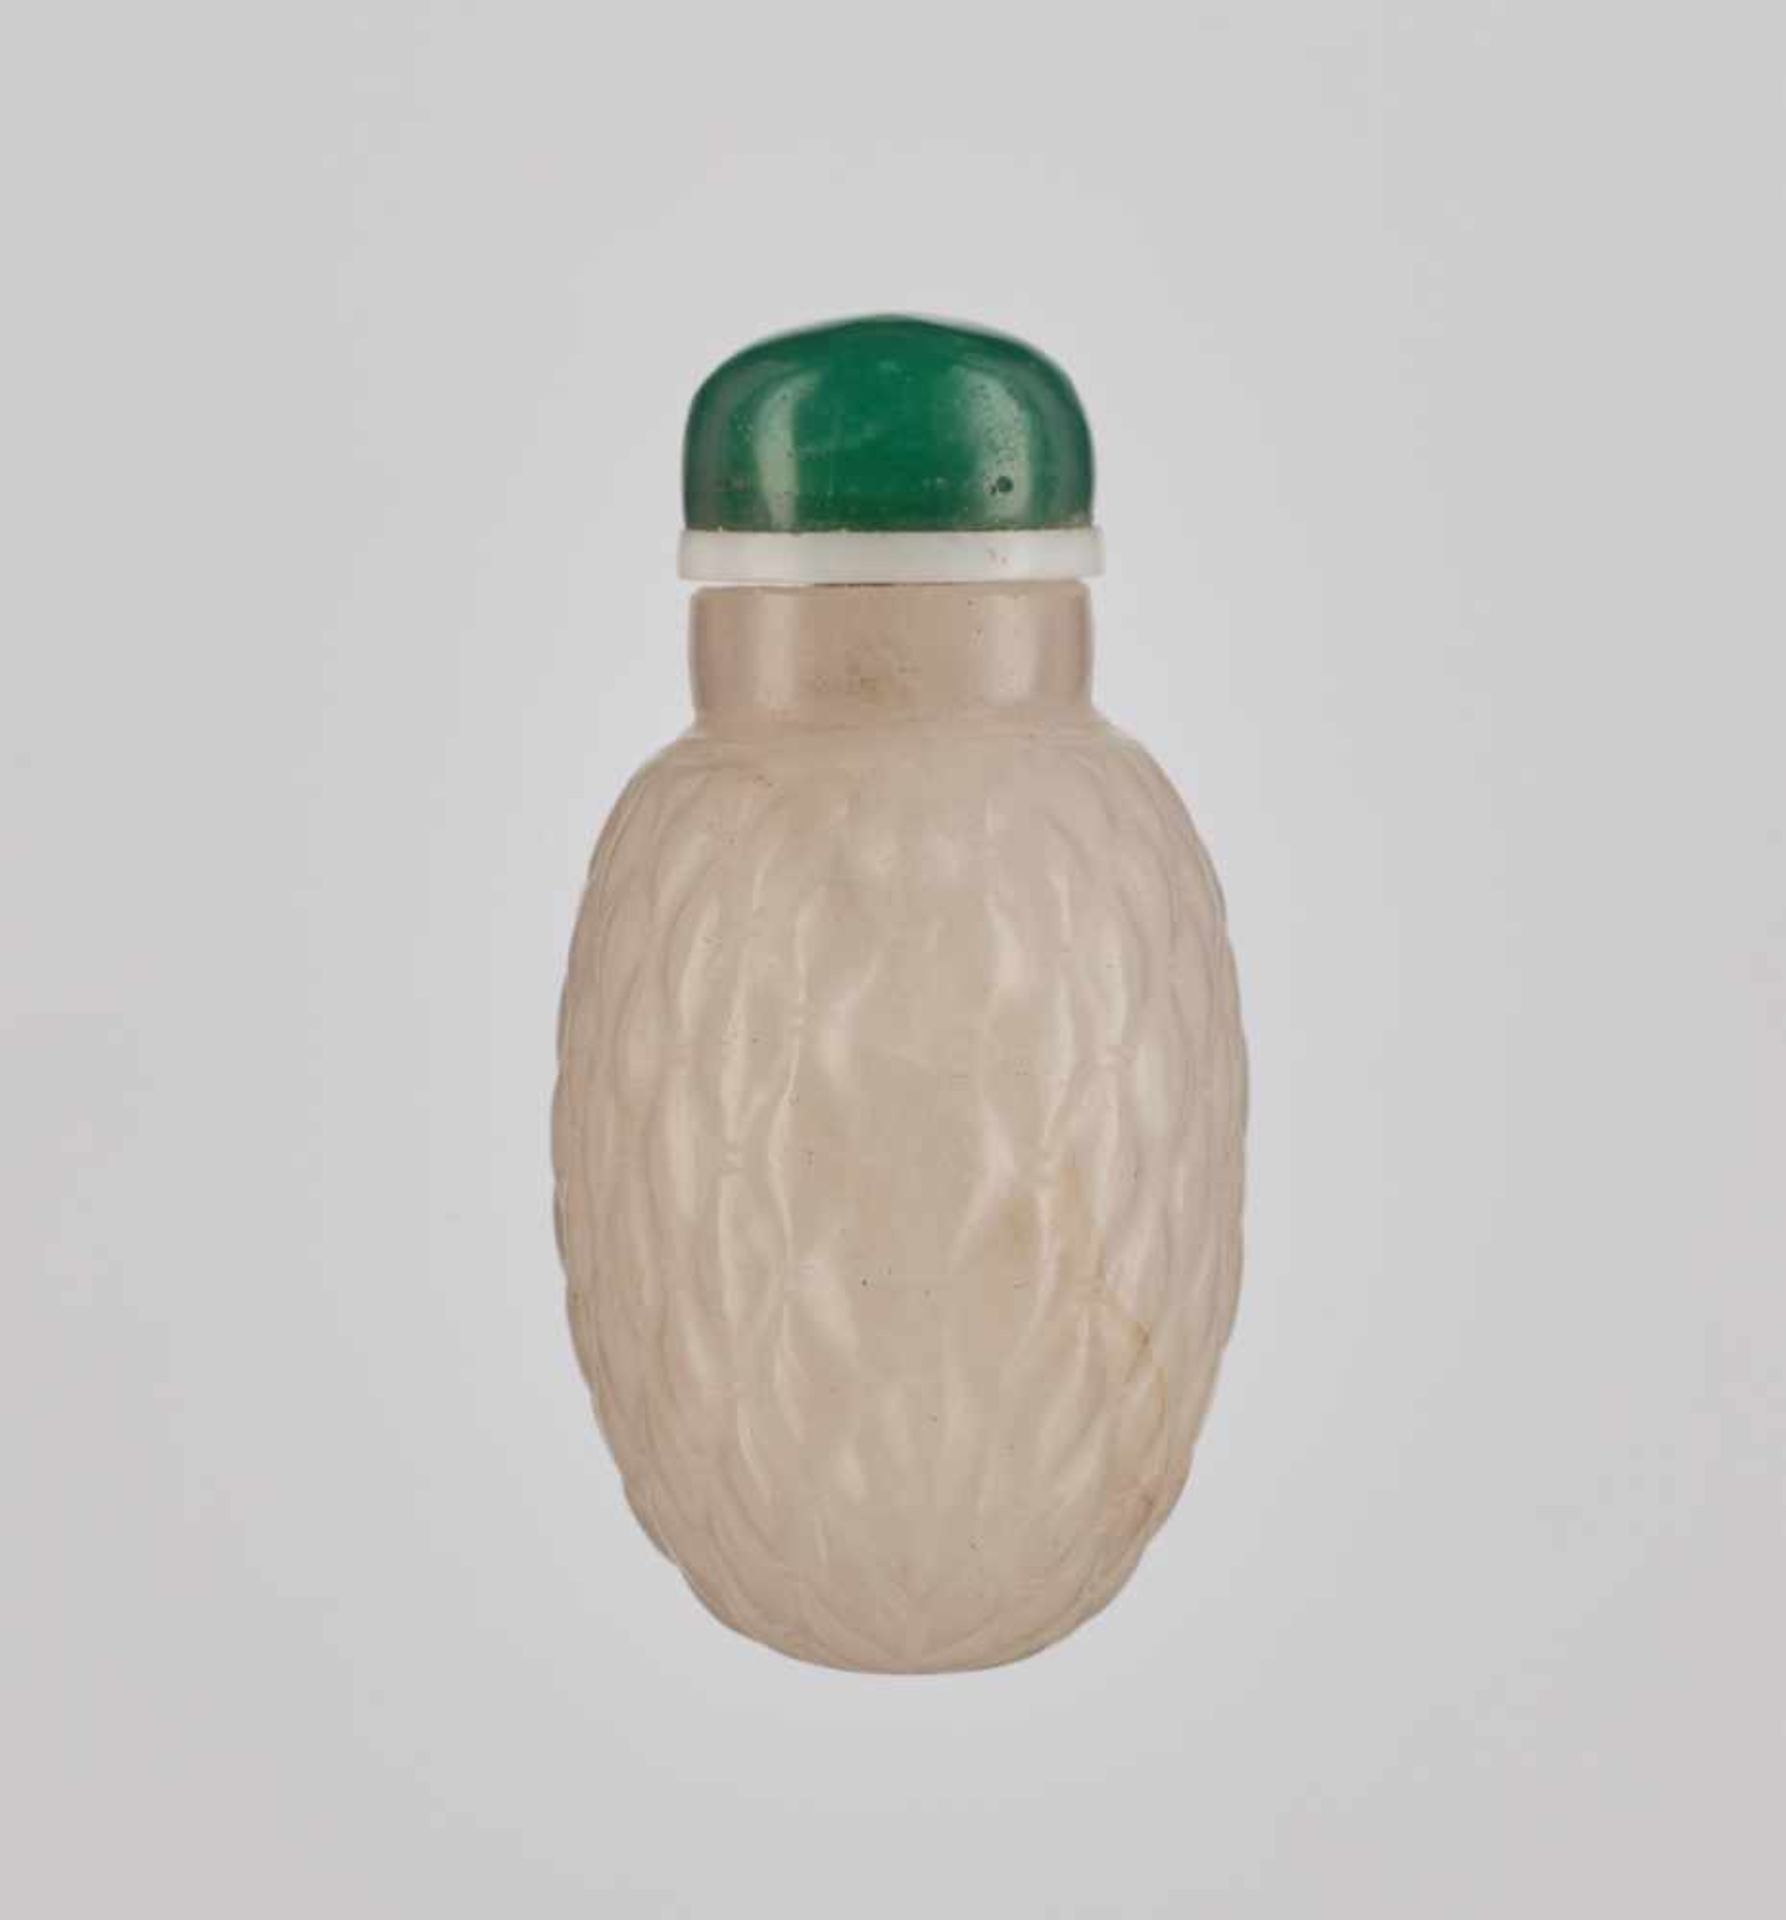 A CARVED CRYSTAL 'BASKETWEAVE' SNUFF BOTTLE, QING DYNASTY Translucent rock crystal, with several - Image 3 of 6